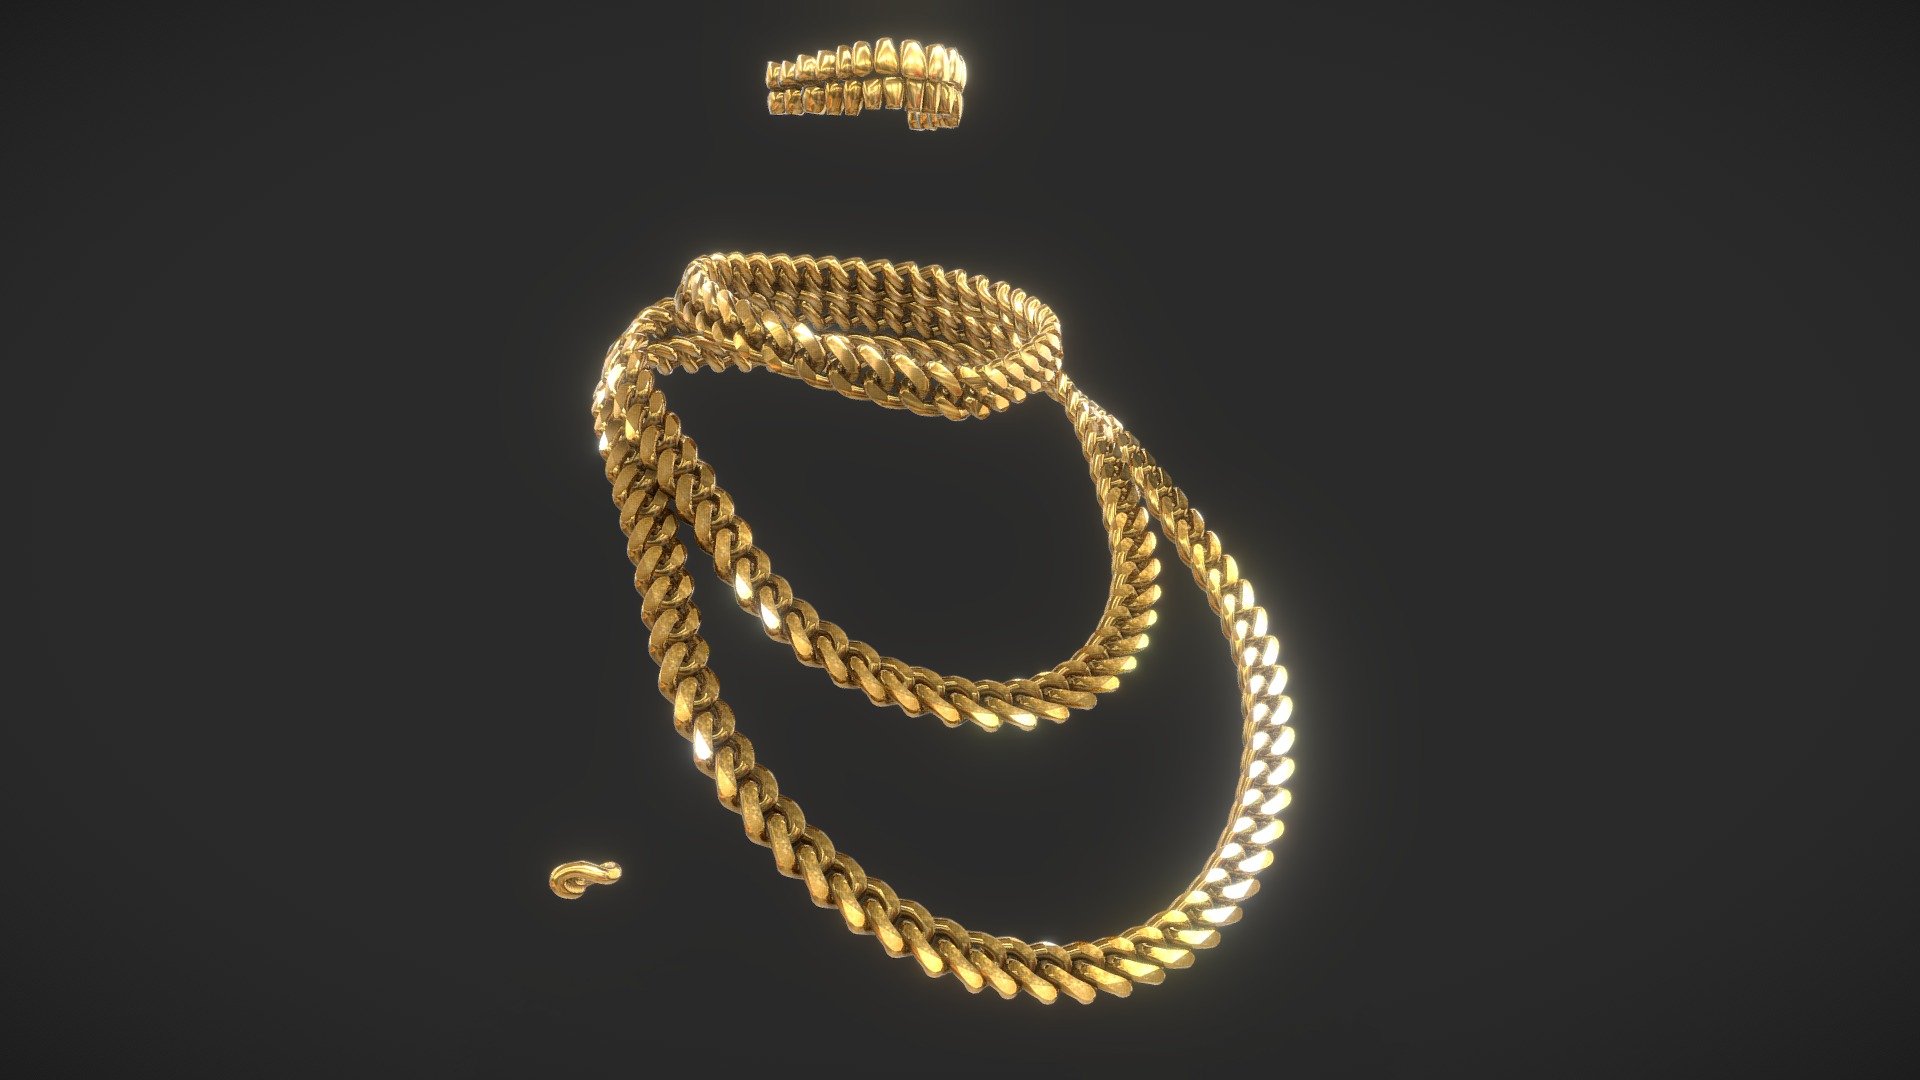 Get your(meta)self some drip with this 14mm Gold Necklace set, includes Gold grill.
3 Chain lengths, and original link for customization.

UV mapped, Highpoly 3d model